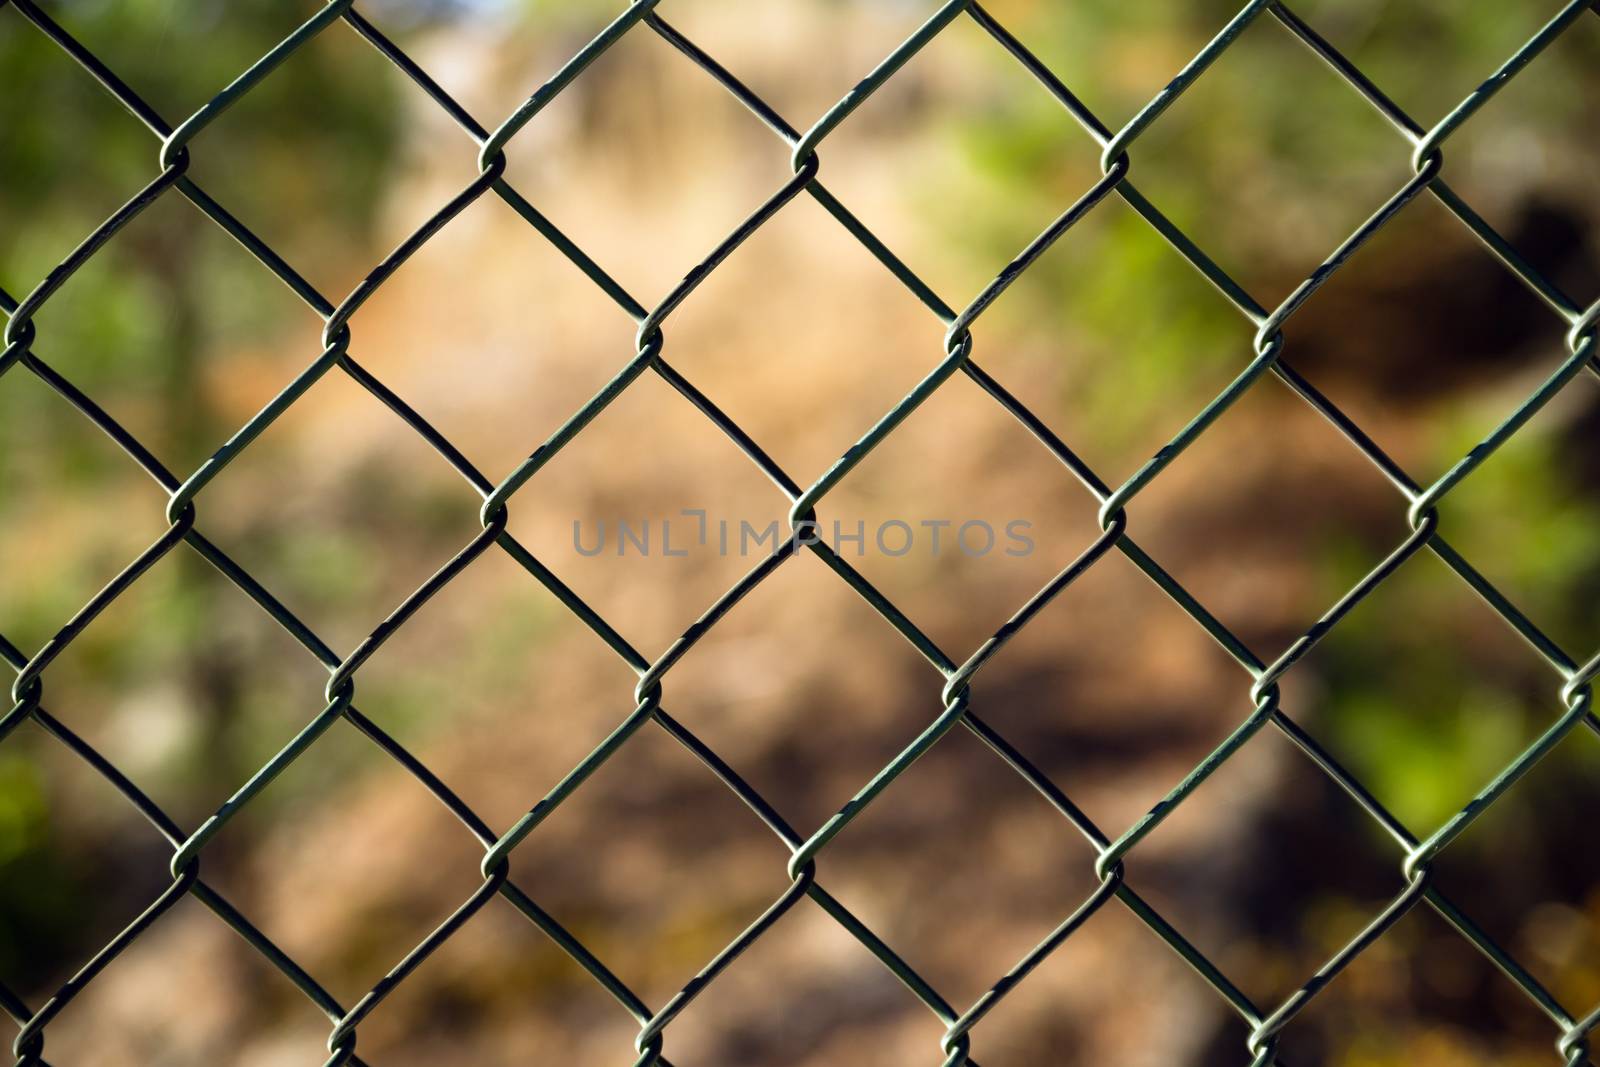 Diagonal Diamond Pattern Chain Link Fence Outside Boundary by ChrisBoswell